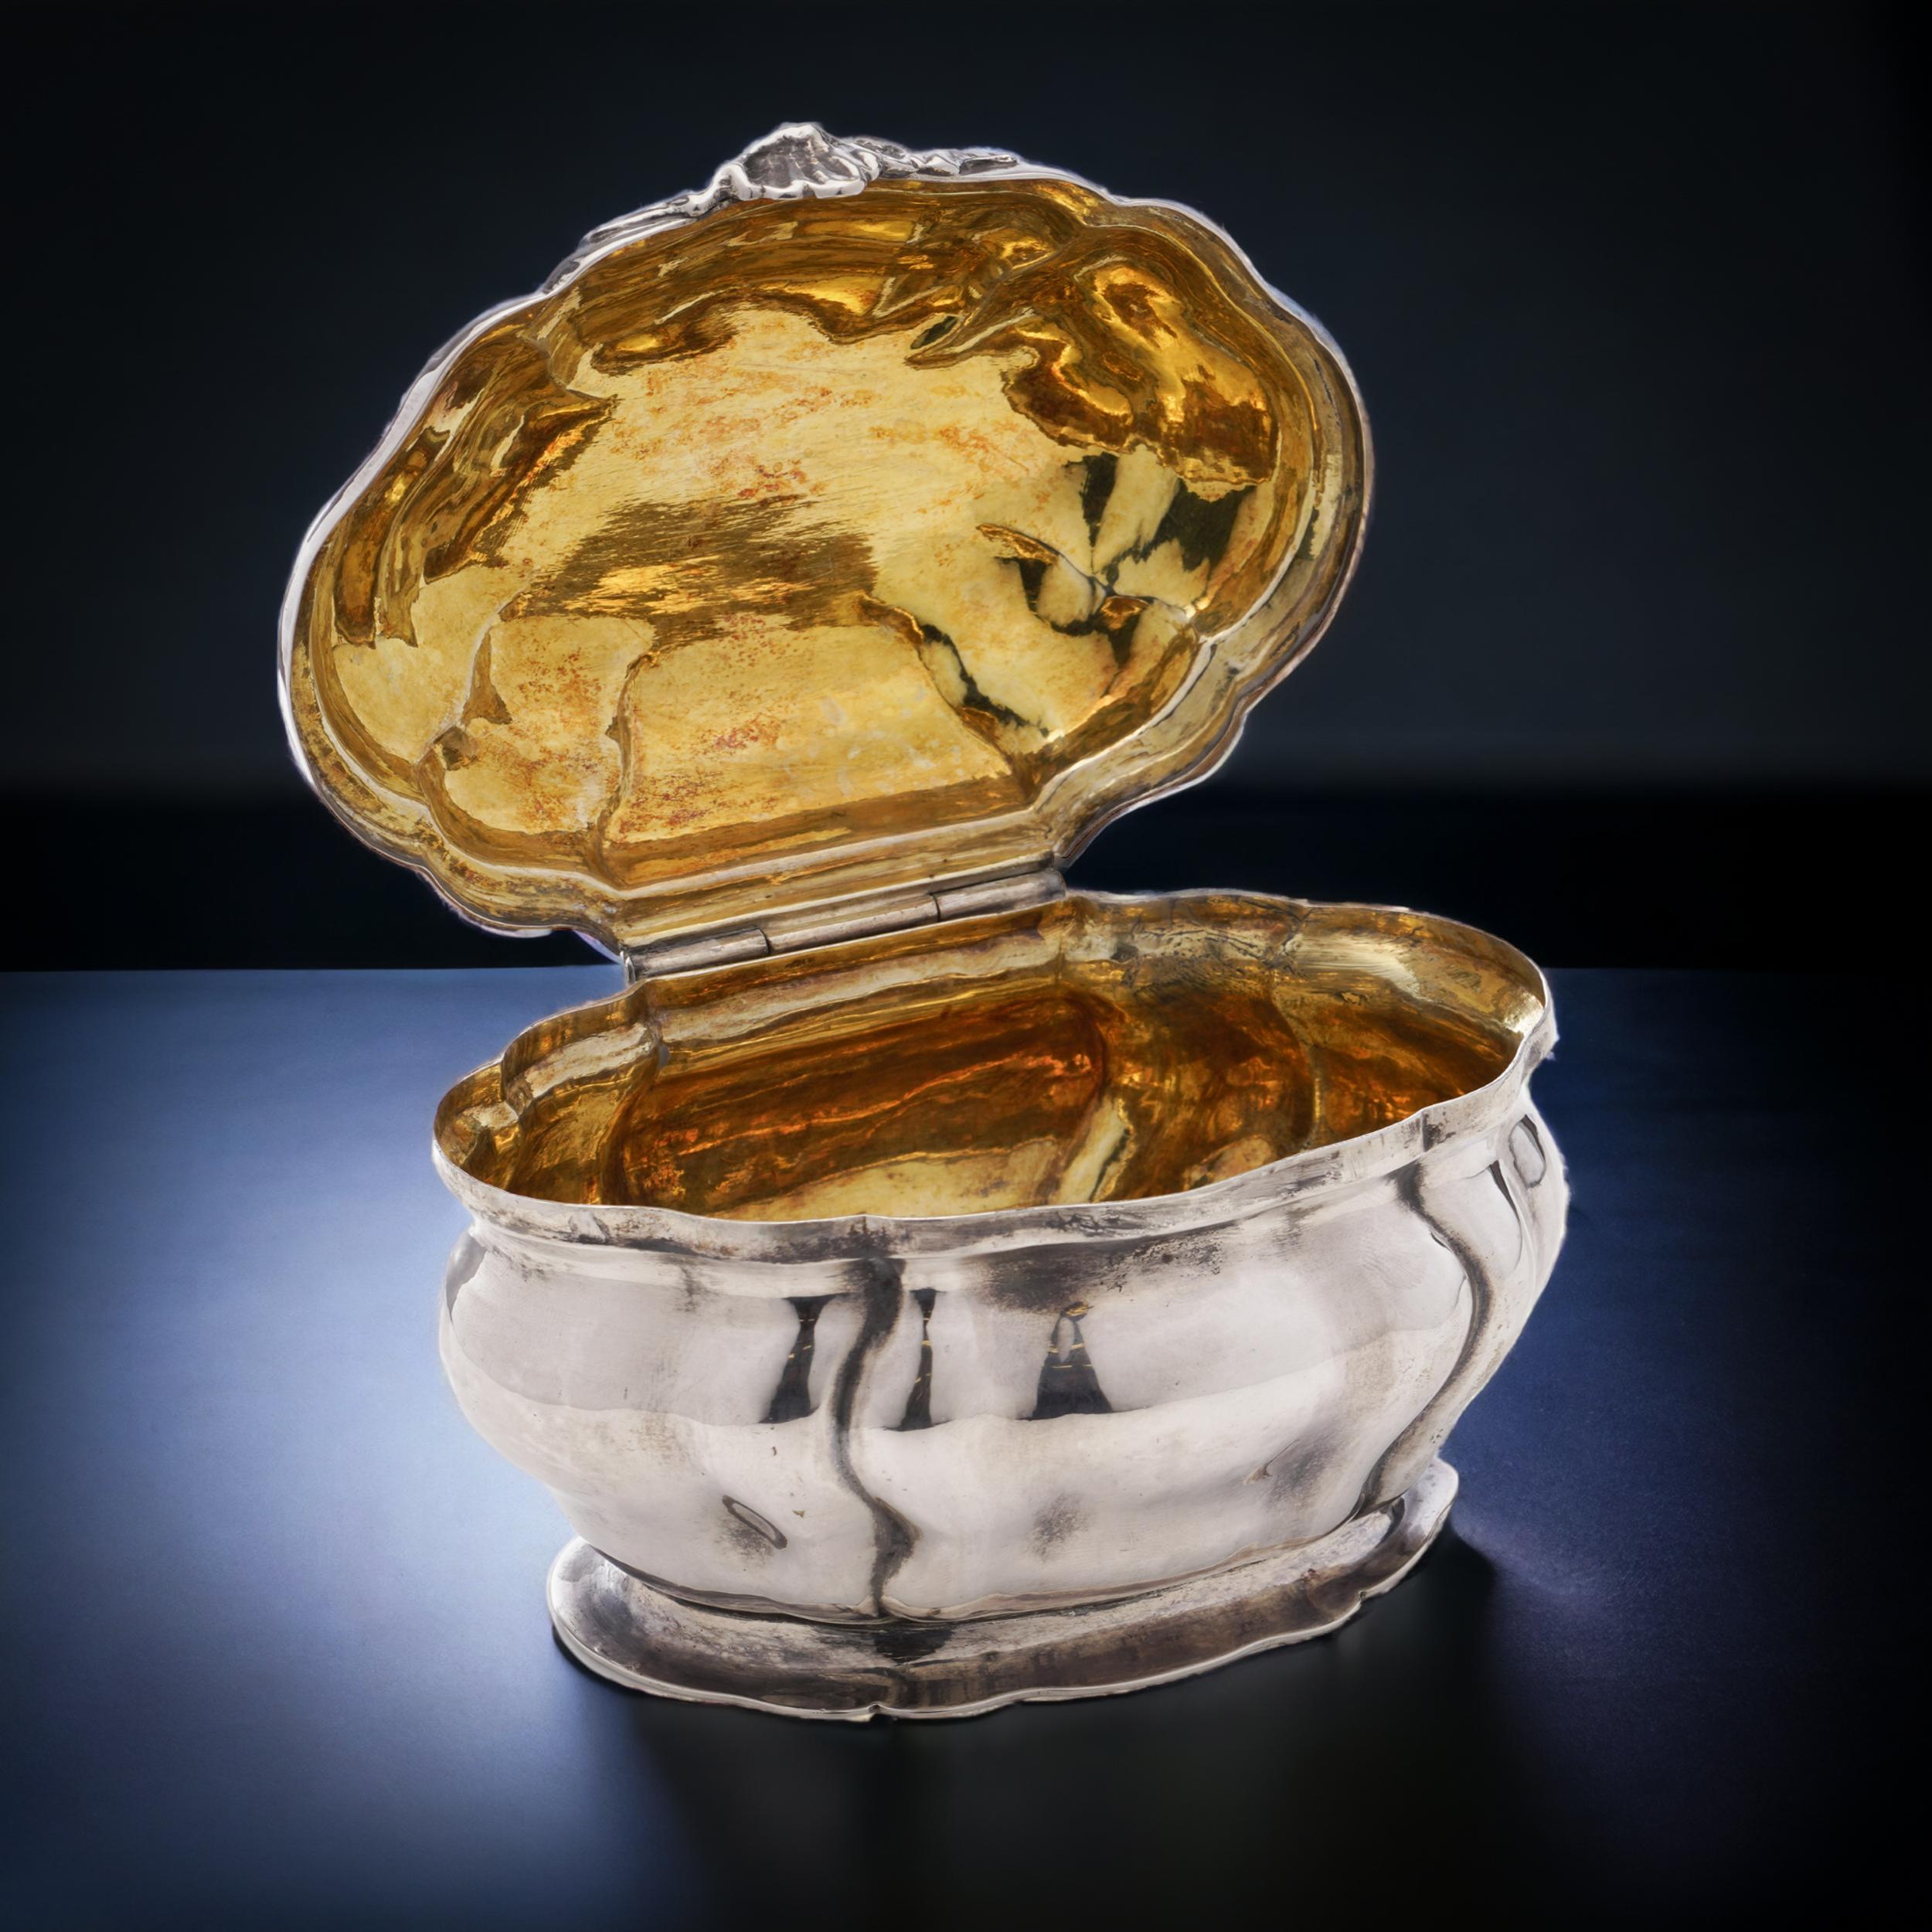 Antique 19th century 800. German silver small oval Tea Caddy with Hanau marks. 
Maker: Unidentified 
Made in Germany, 19th Century 
Tested positive for 800. silver. 

The tea caddy is in an oval shape, with a hinged lid with the engraved family